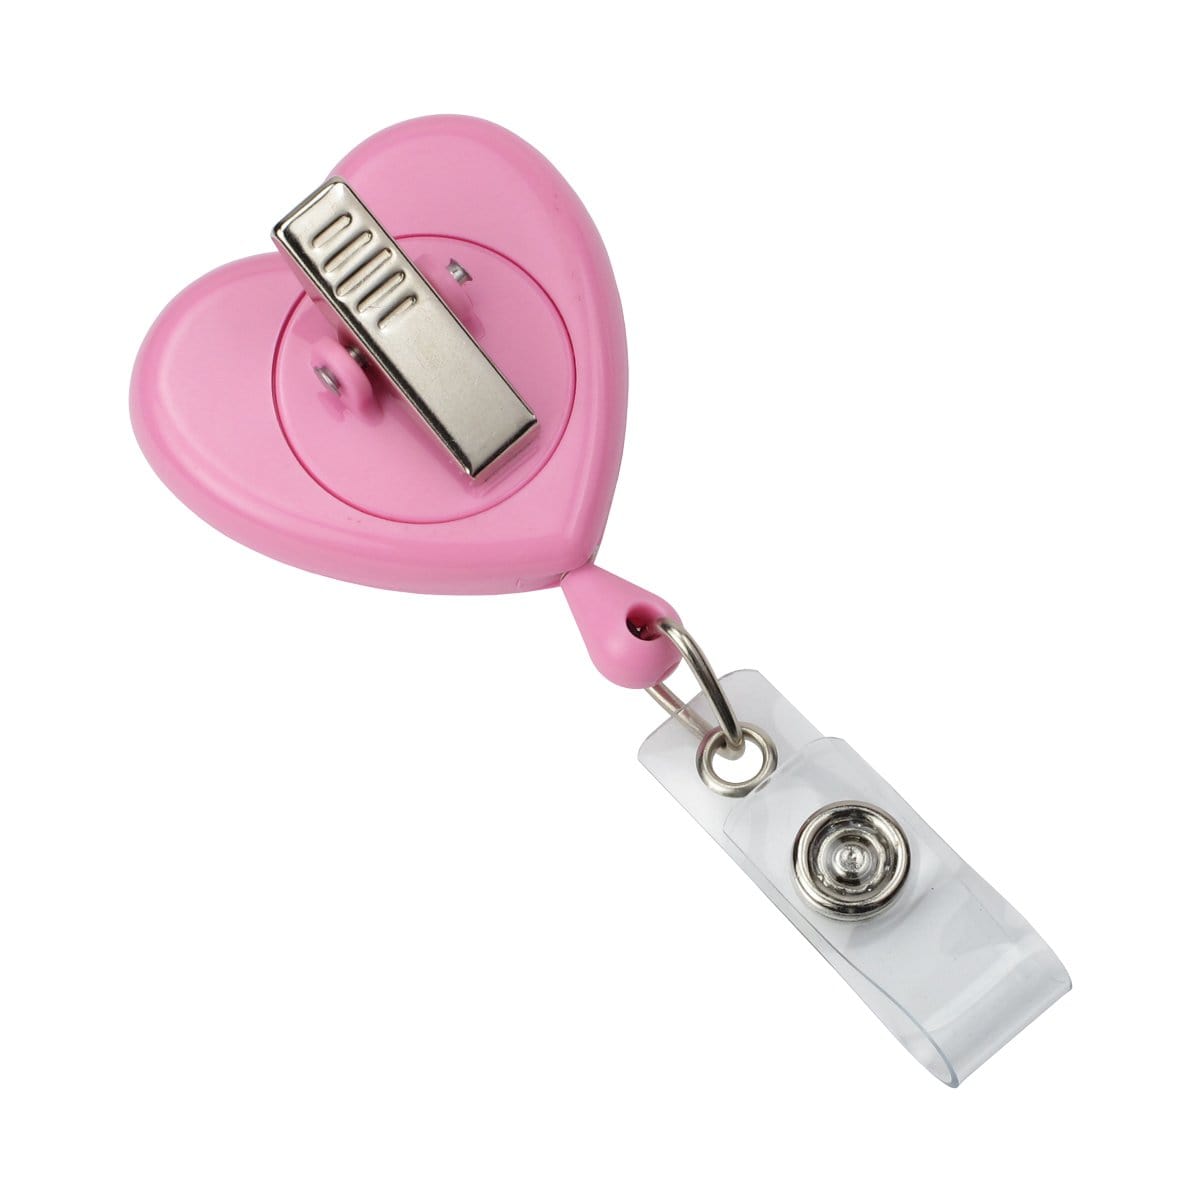 A pink heart-shaped badge holder features a retractable mechanism with a metal clip and a clear plastic strap. This Heart Shaped Ribbon "Awareness" Badge Reel with Swivel Spring Clip (P/N 2120-7630) also includes a swivel spring clip for added convenience.